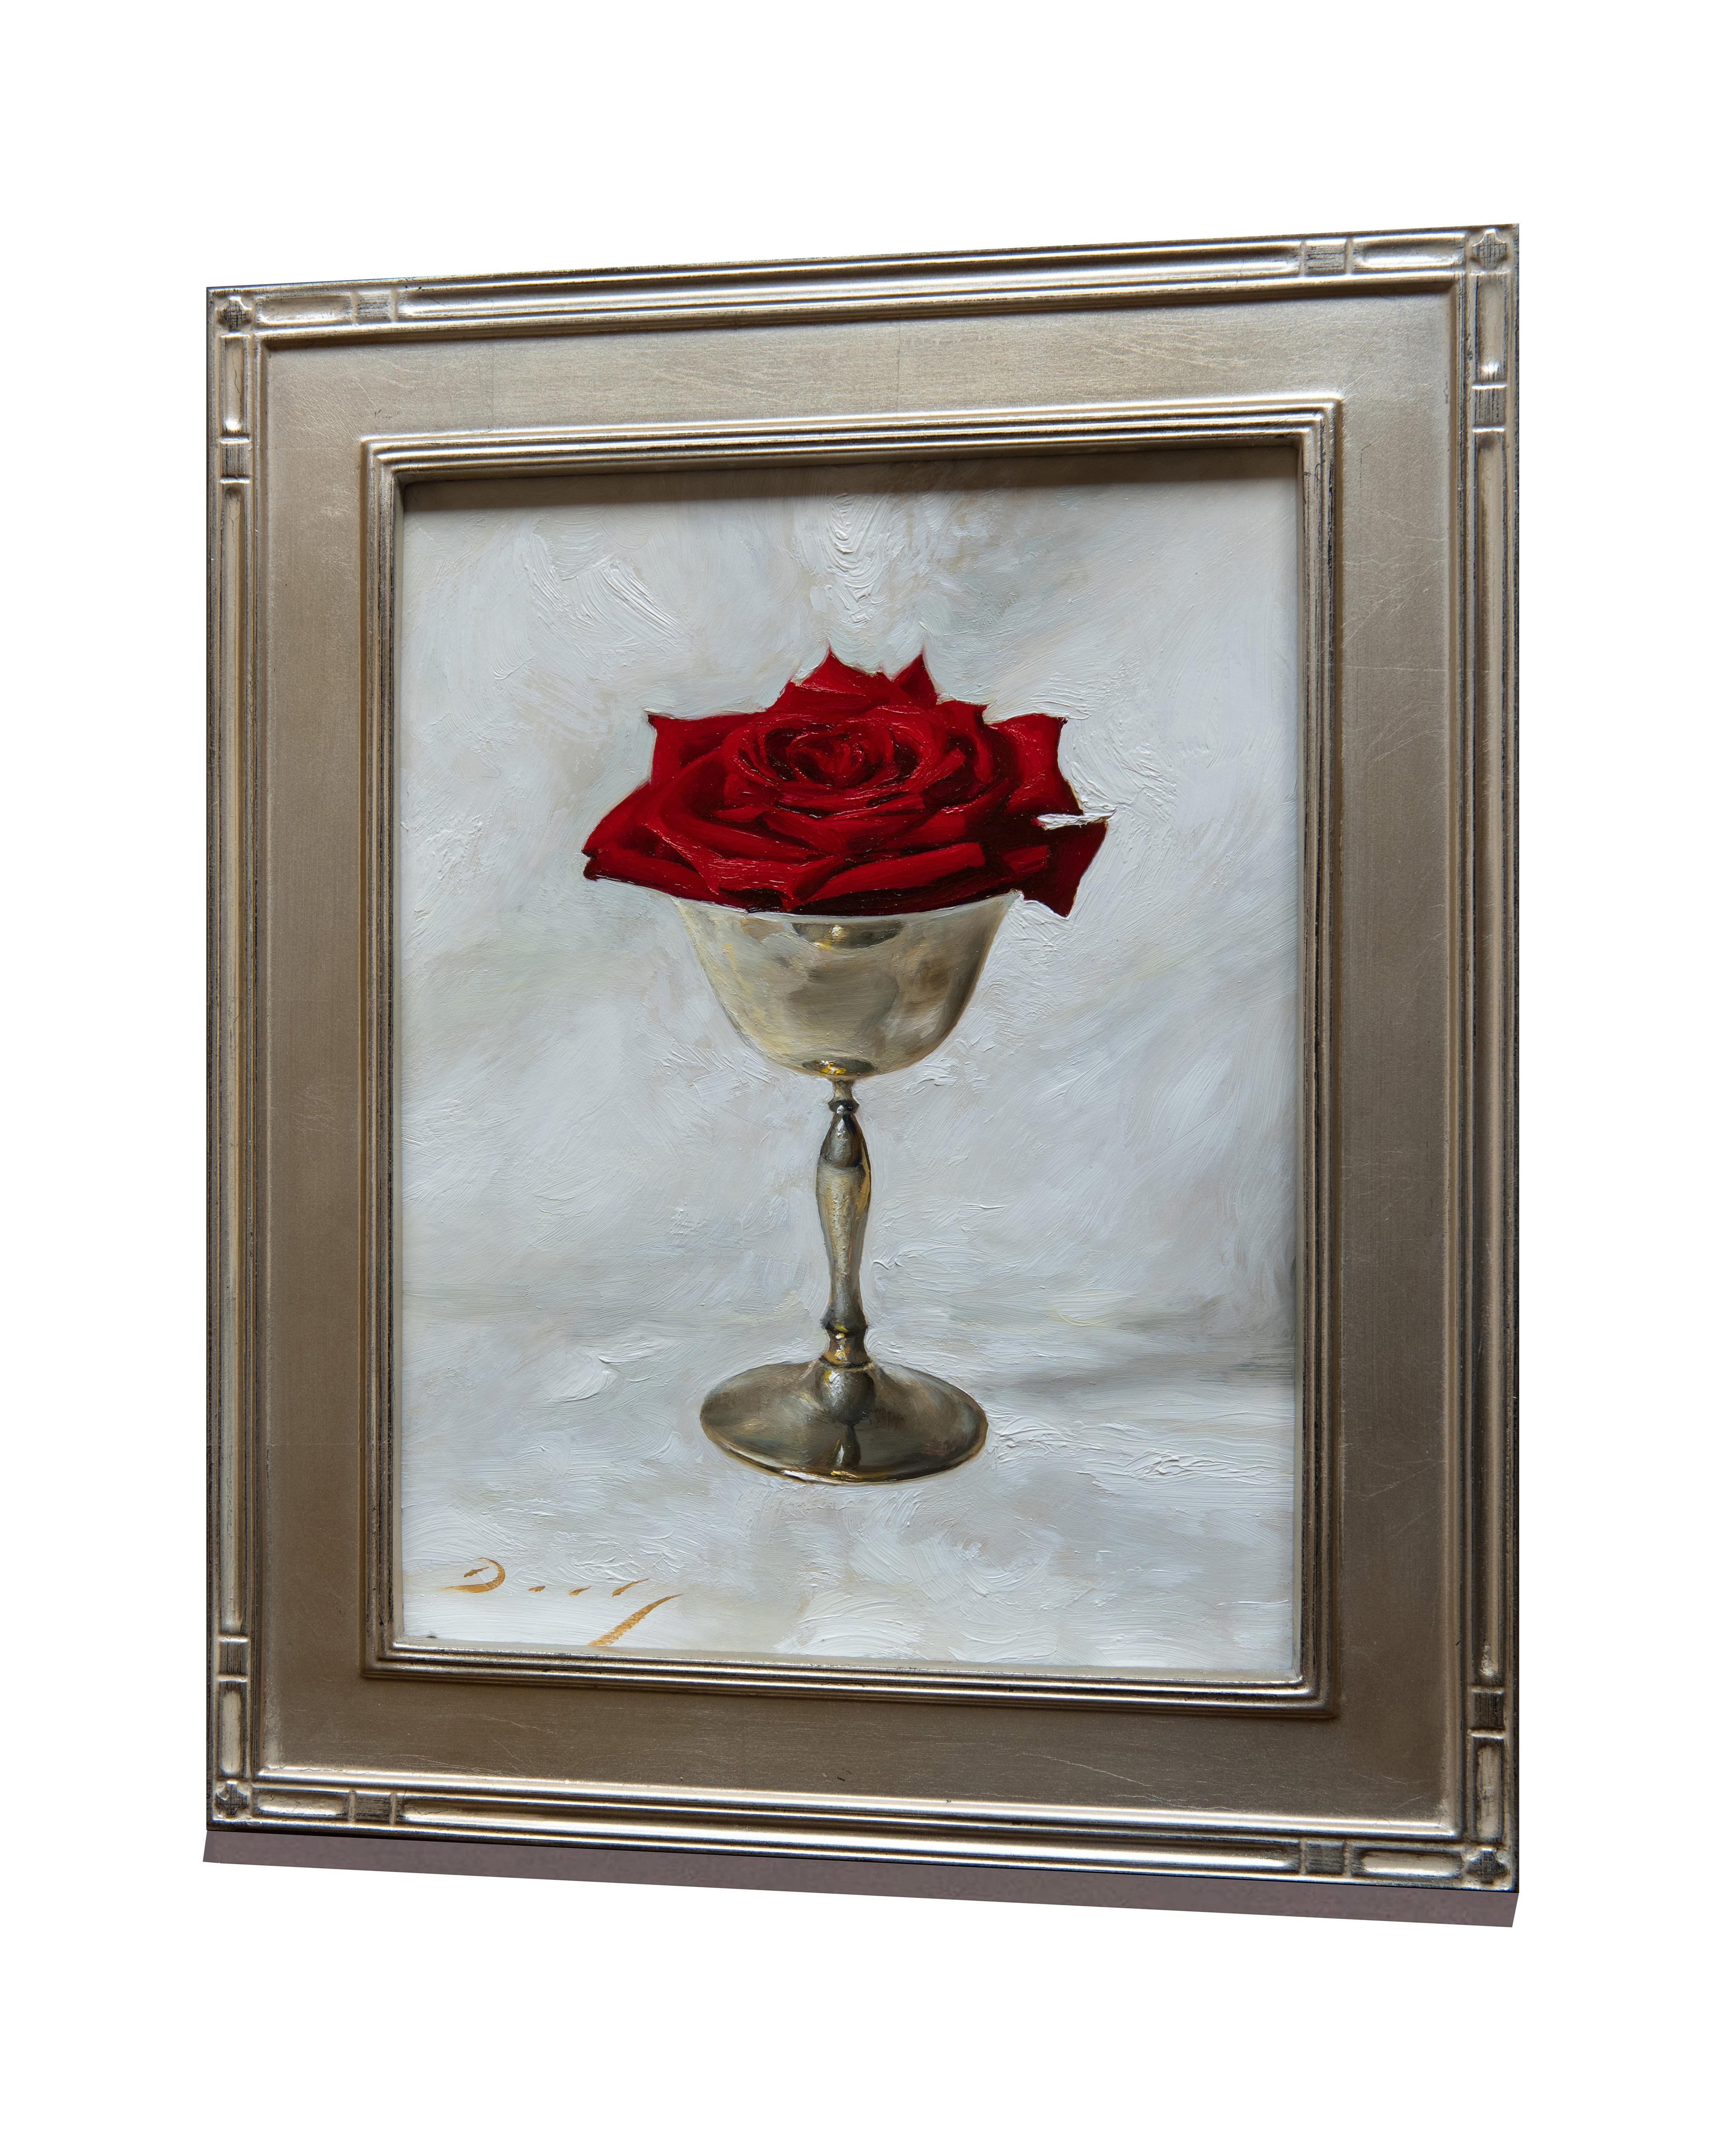 Realist still-life with red rose in silver cup, 